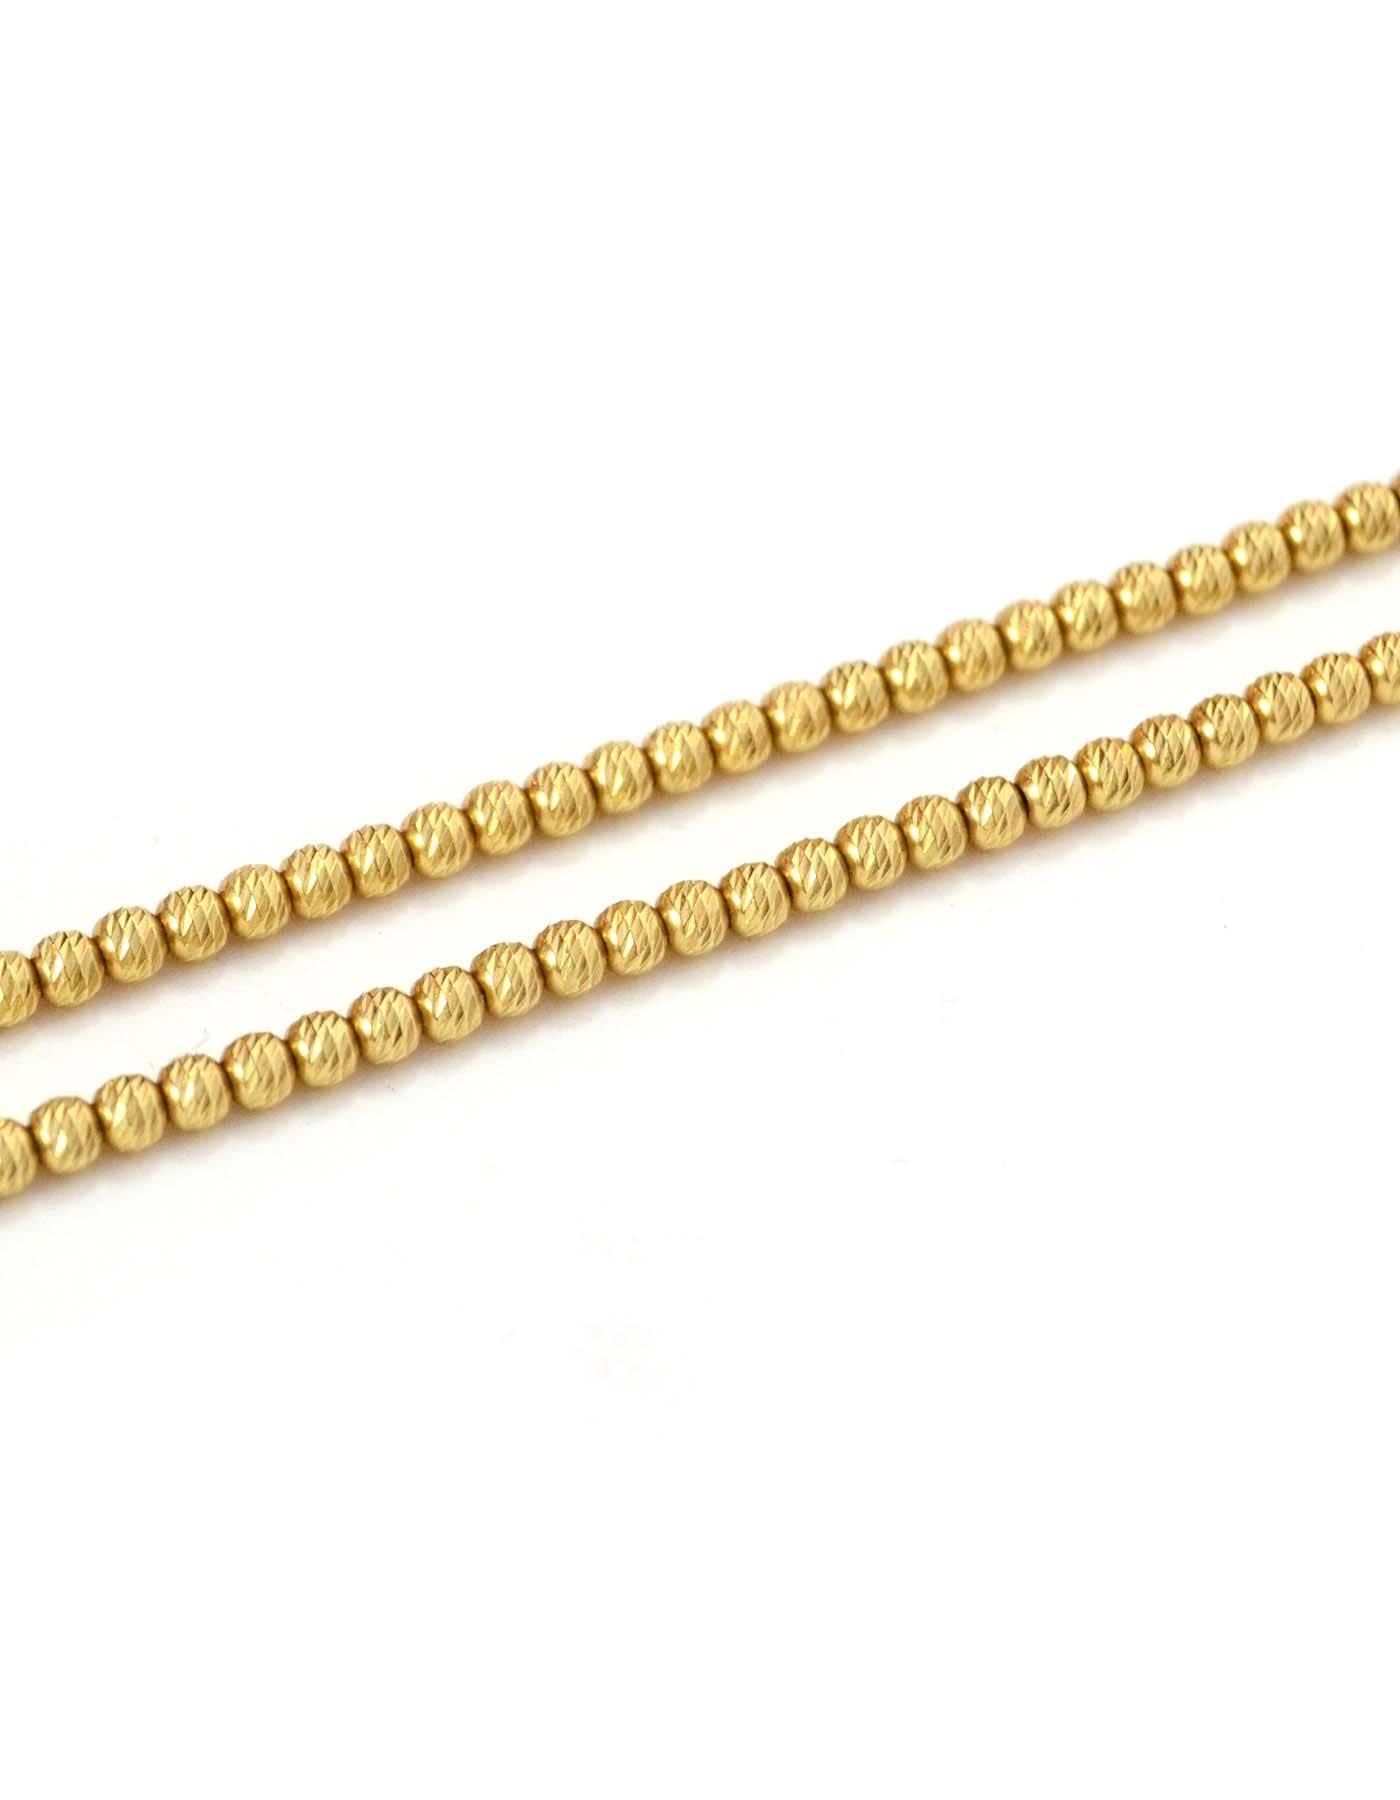 18k Beaded Gold Necklace
Faceted beads create a diamond effect/sparkle 

Made In: Italy
Color: Gold
Materials: 18k gold
Closure: Lobster claw clasp
Stamp: Italy 750
Retail Price: purchased from Bergdorf Goodman for $1,000 + tax
Overall Condition: